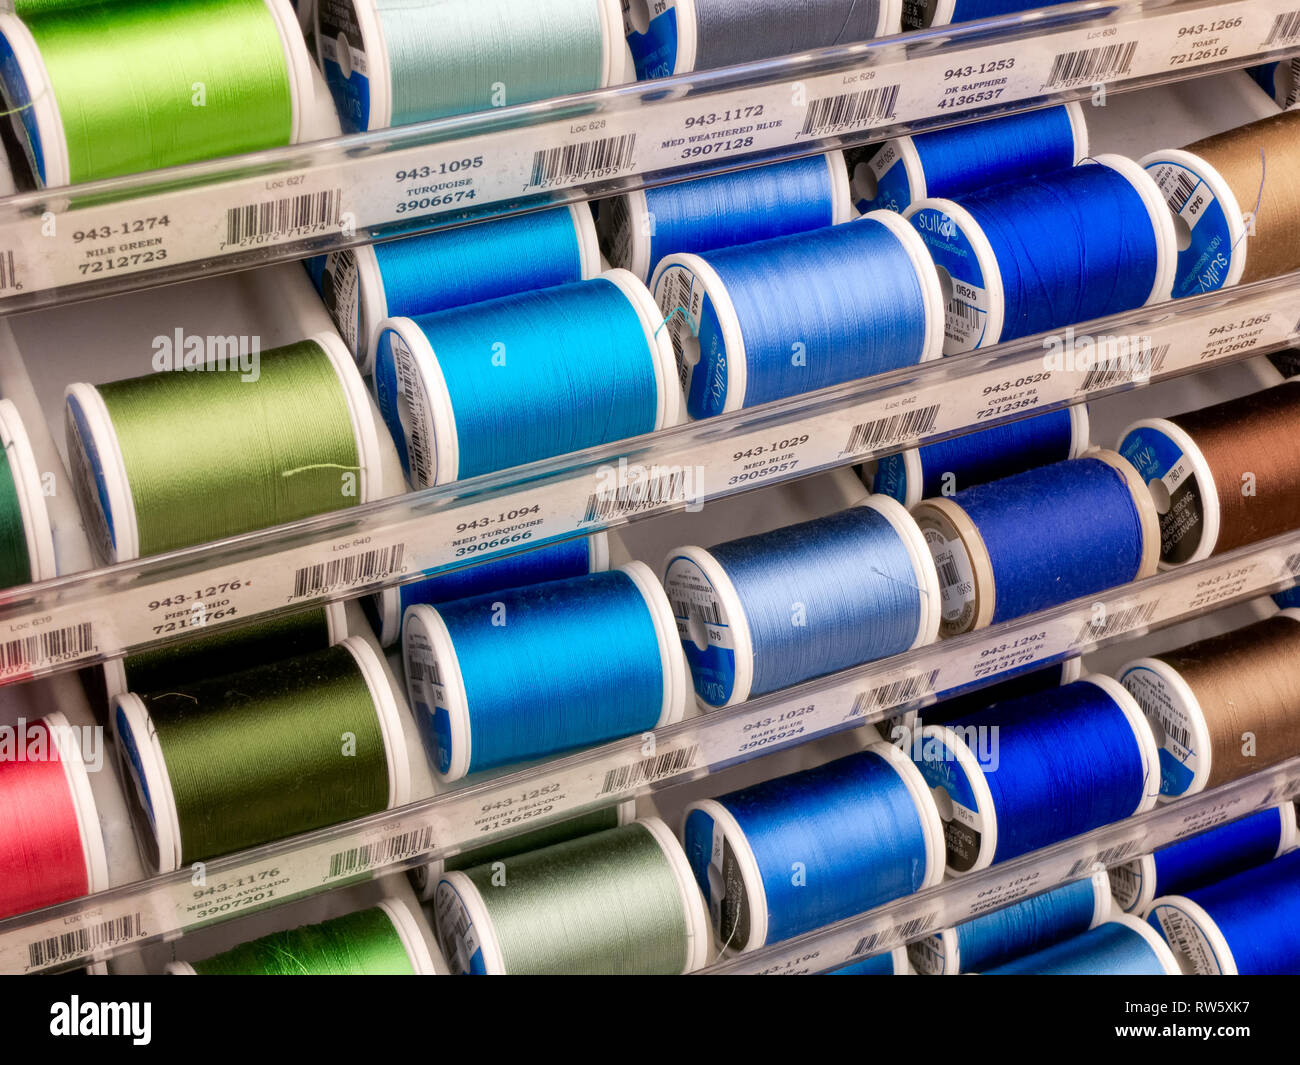 ST. PAUL, MN/USA - MARCH 3, 2019: Sulky of America spools of thread and trademark logo. Sulky is a manufacter of thread and craft supplies. Stock Photo